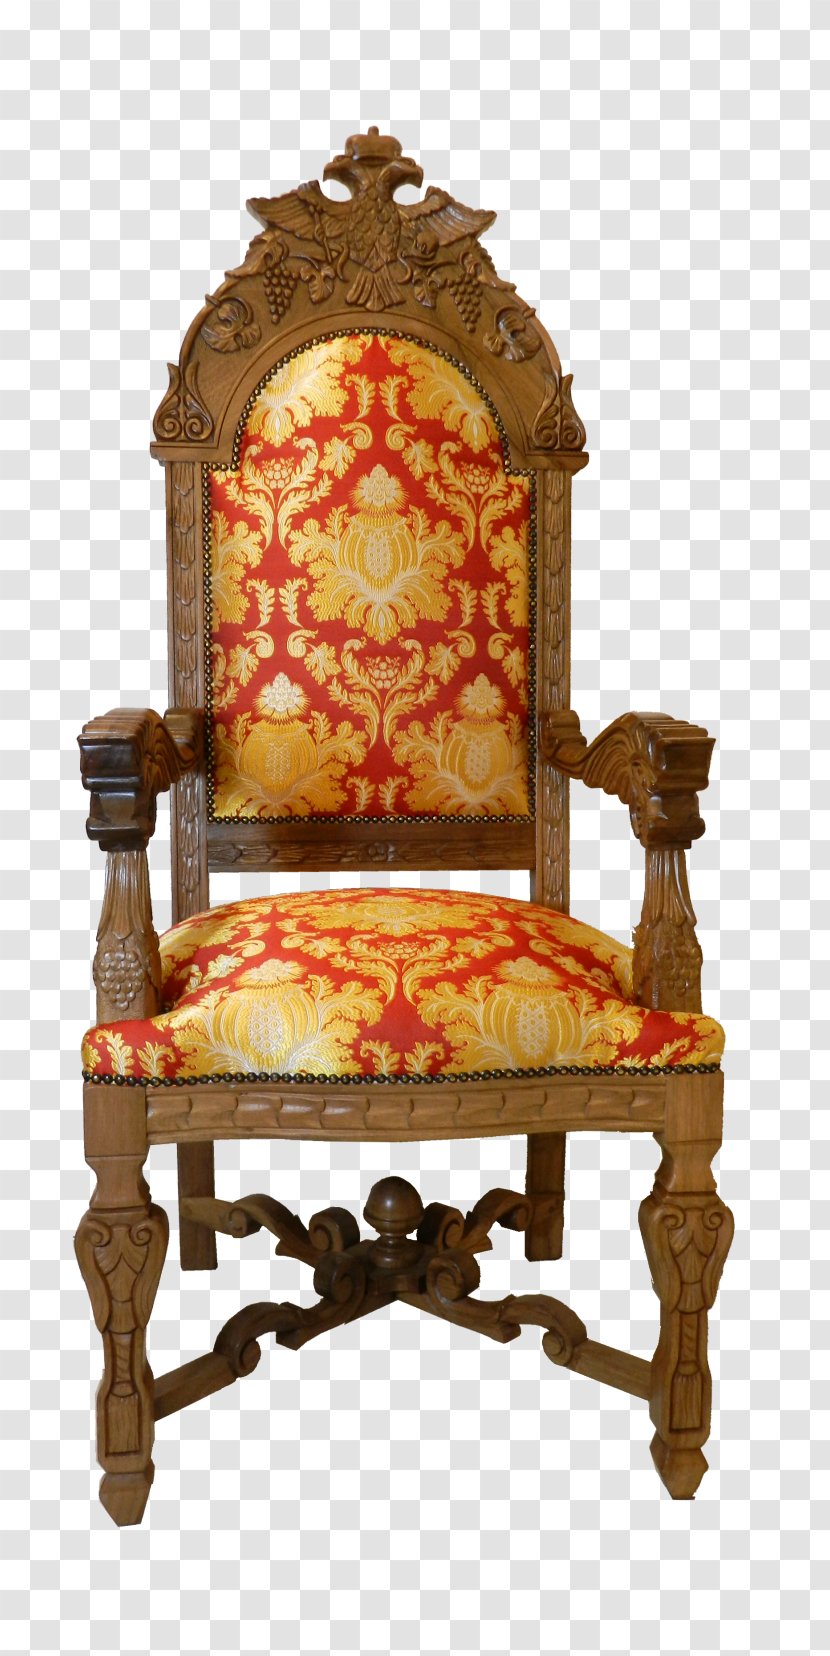 Throne Antique Garden Furniture - Misleading Publicity Will Receive Penalties Transparent PNG